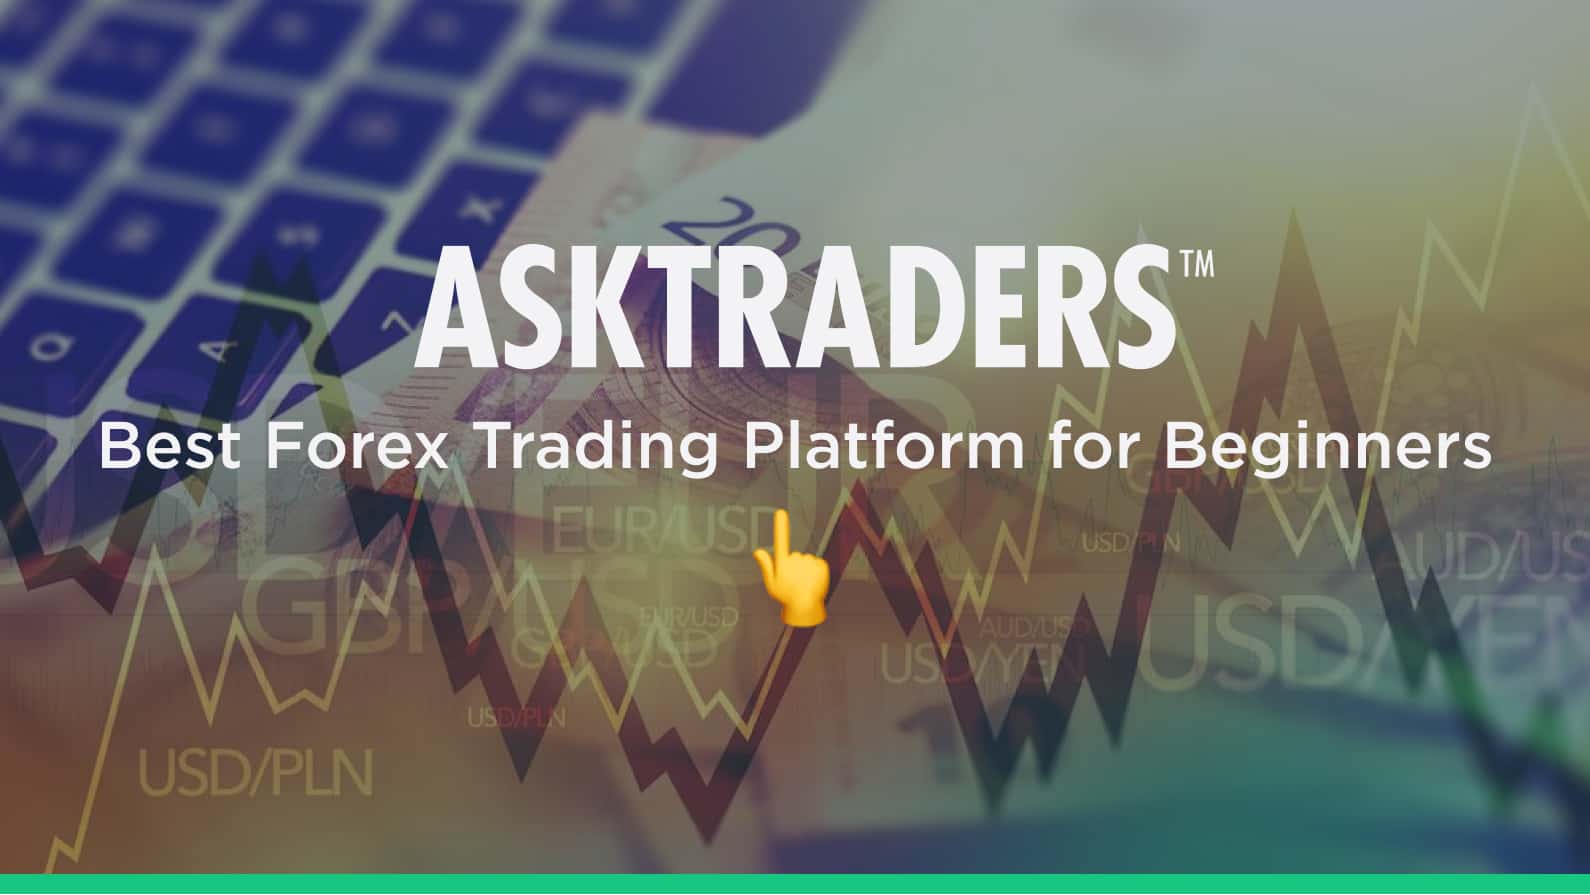 The Best Forex Trading Platform for Beginners – AskTraders